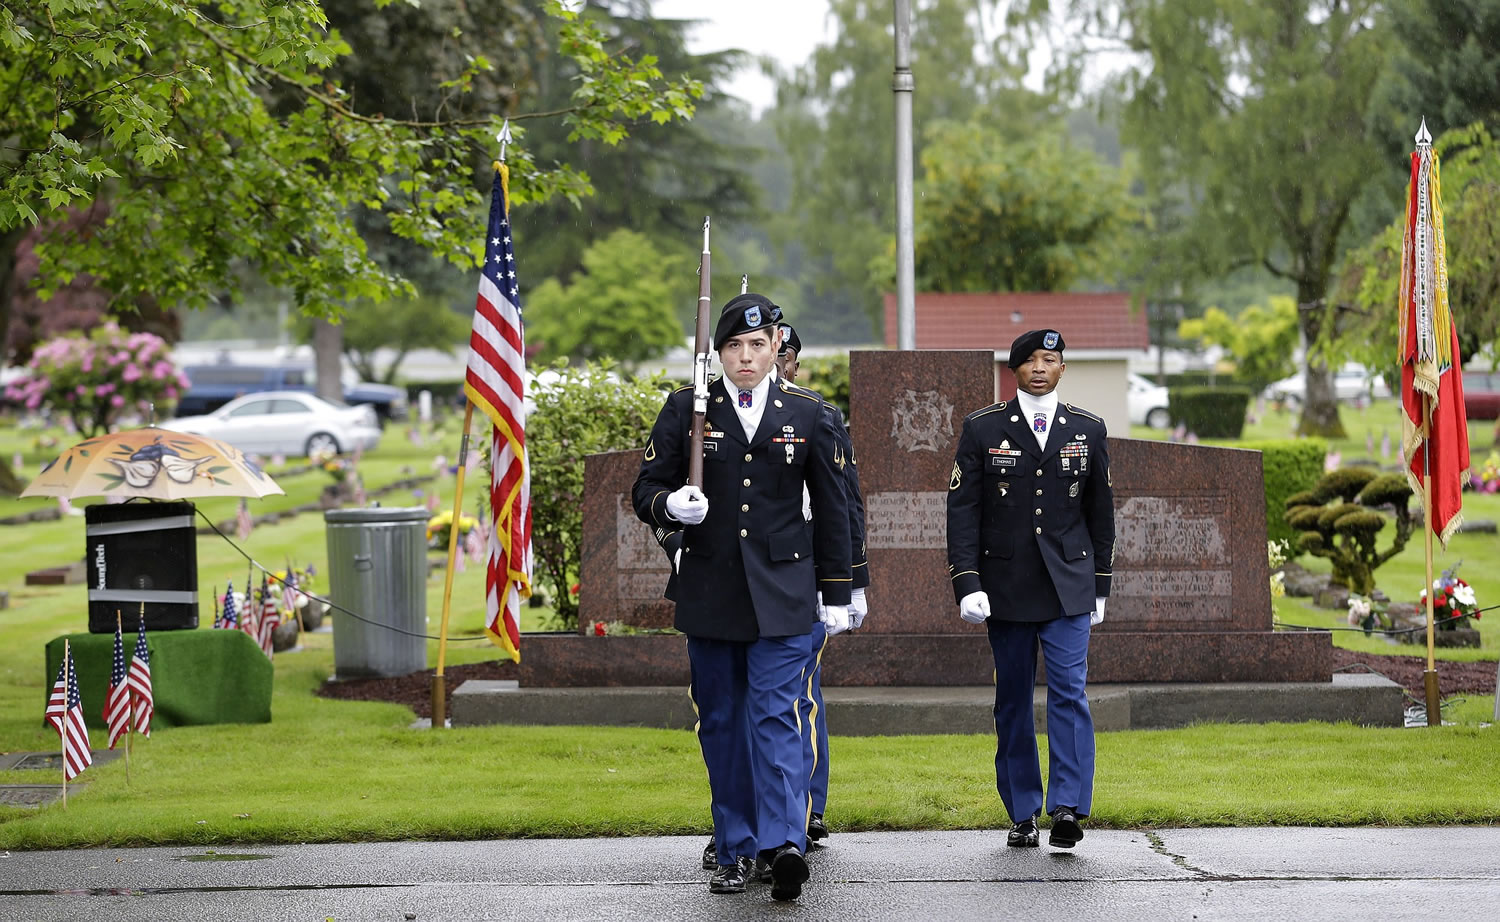 An honor guard from the 13th Combat Sustainment Support Battalion at Joint Base Lewis McChord takes part in a Memorial Day ceremony Monday at the Sumner Cemetery in Puyallup,.